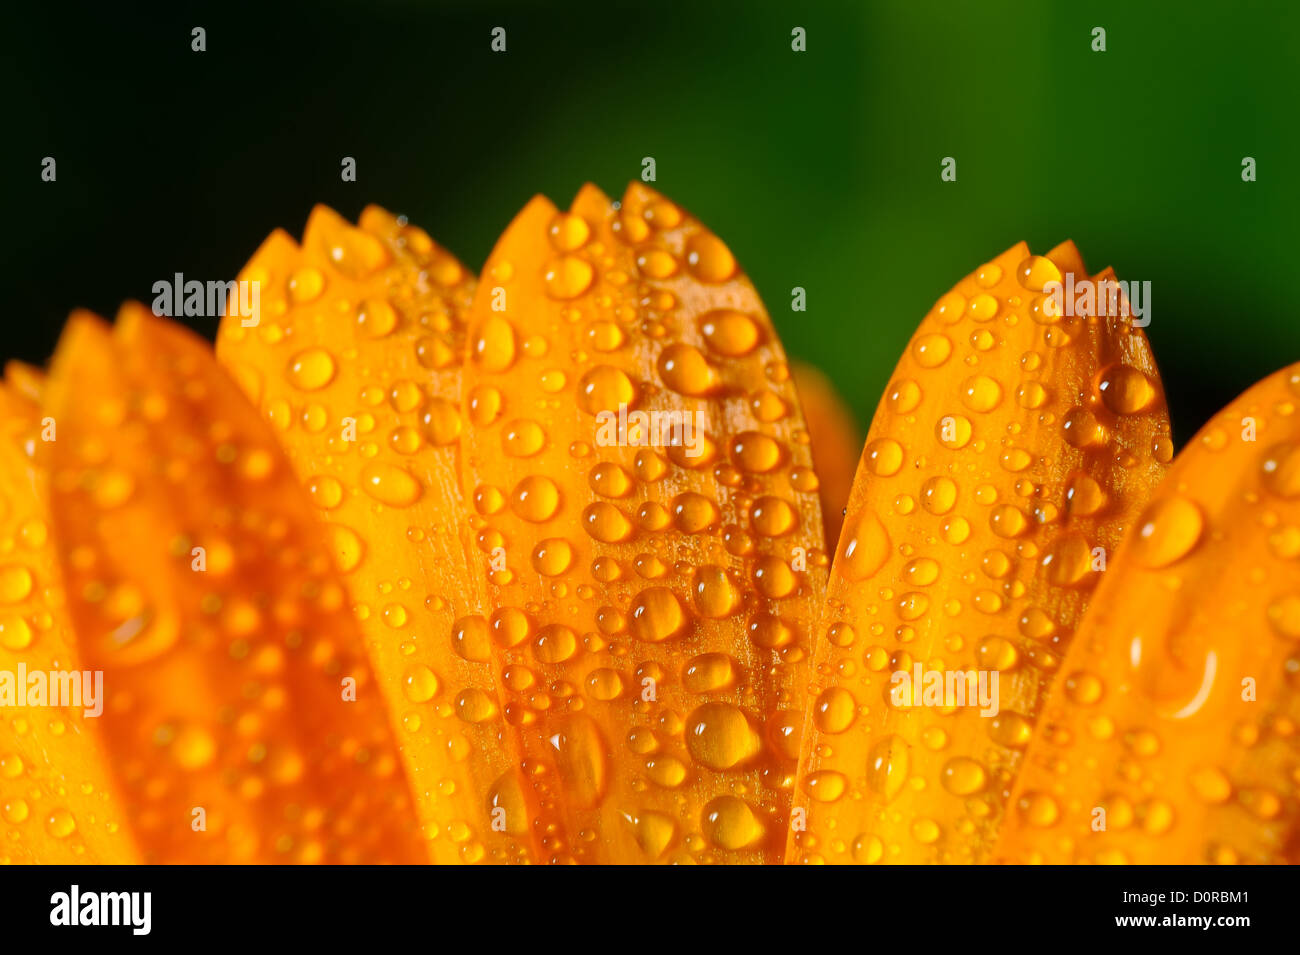 Flower petals with dew drops Stock Photo